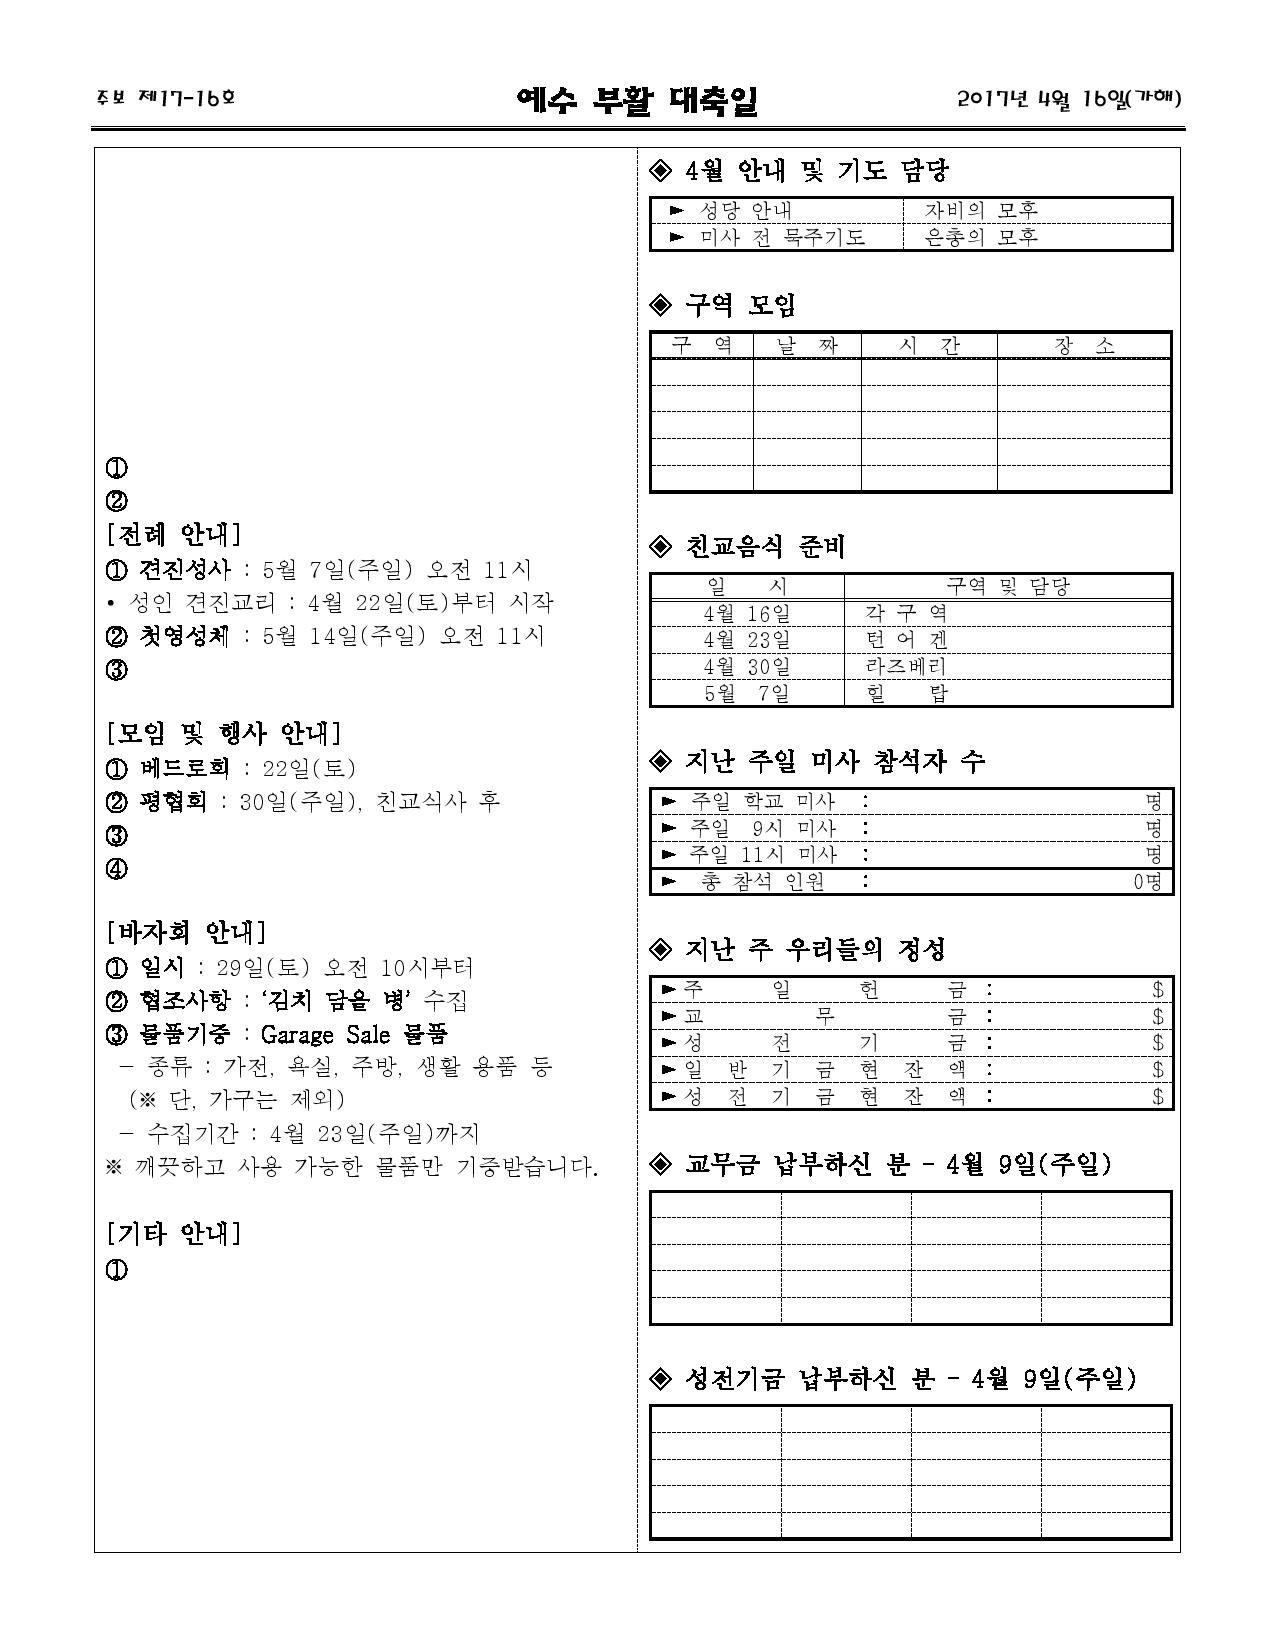 Document-page-003.jpg